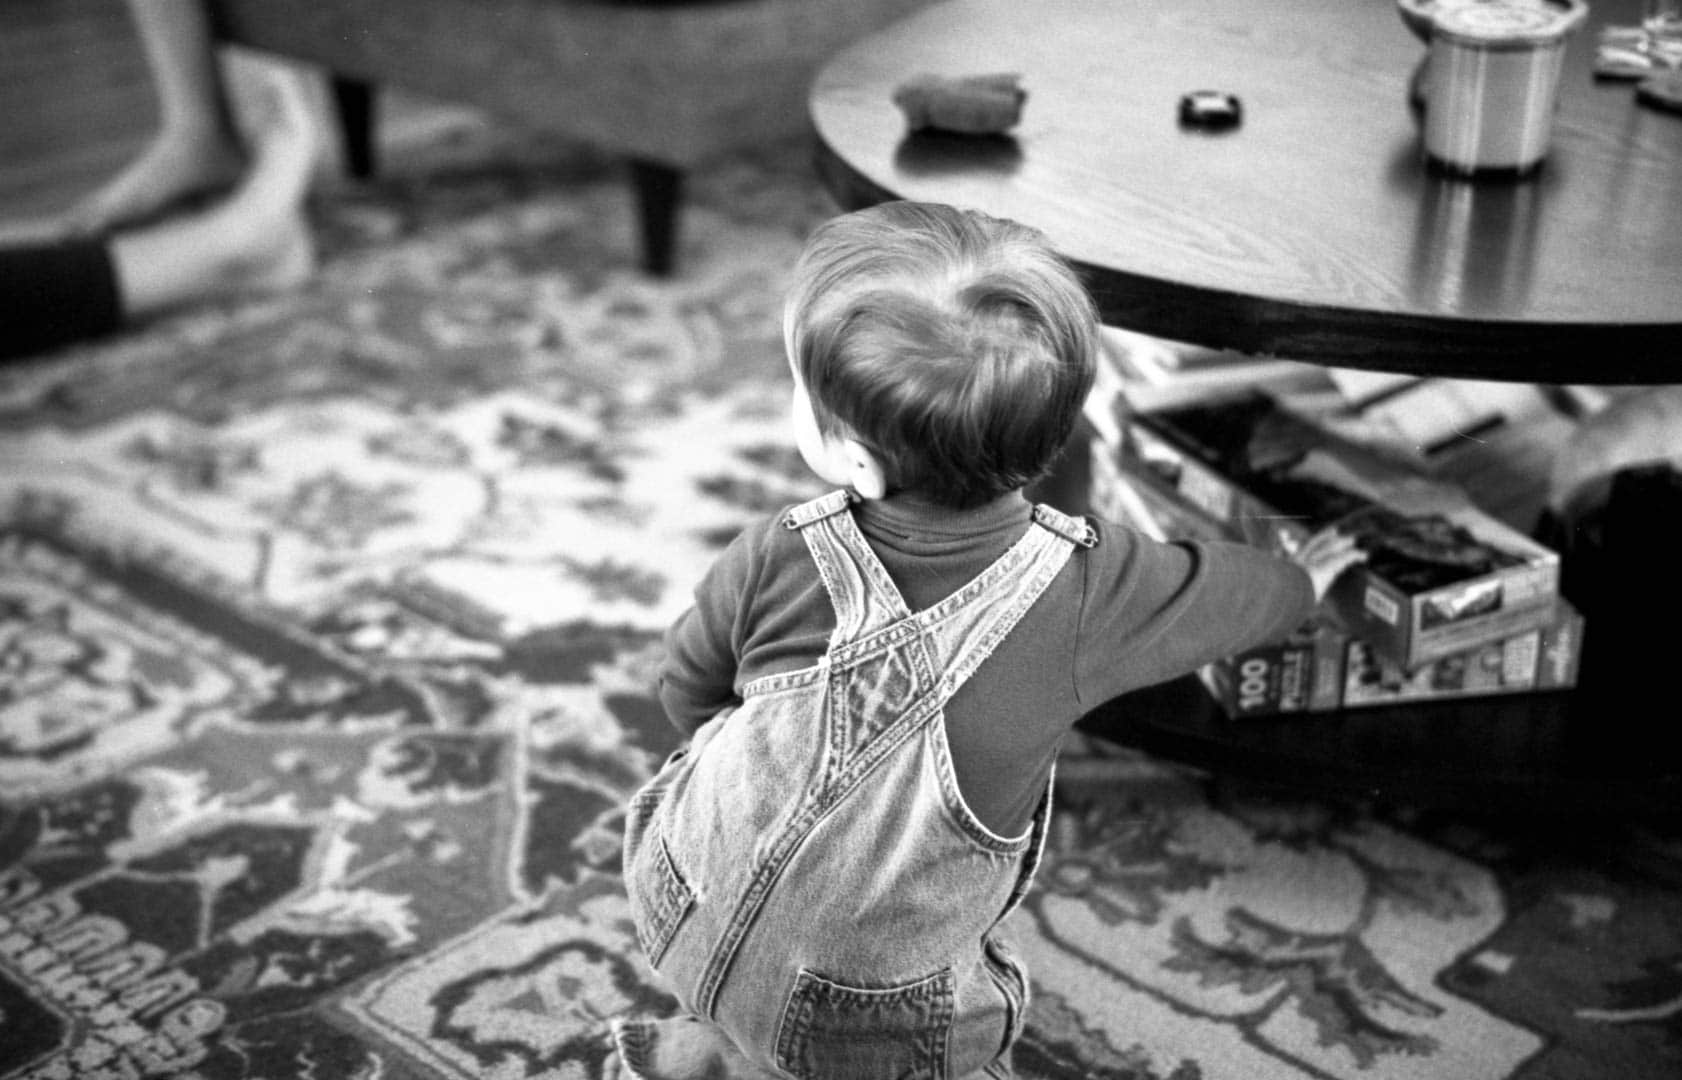 A baby in overalls plays on a living room floor